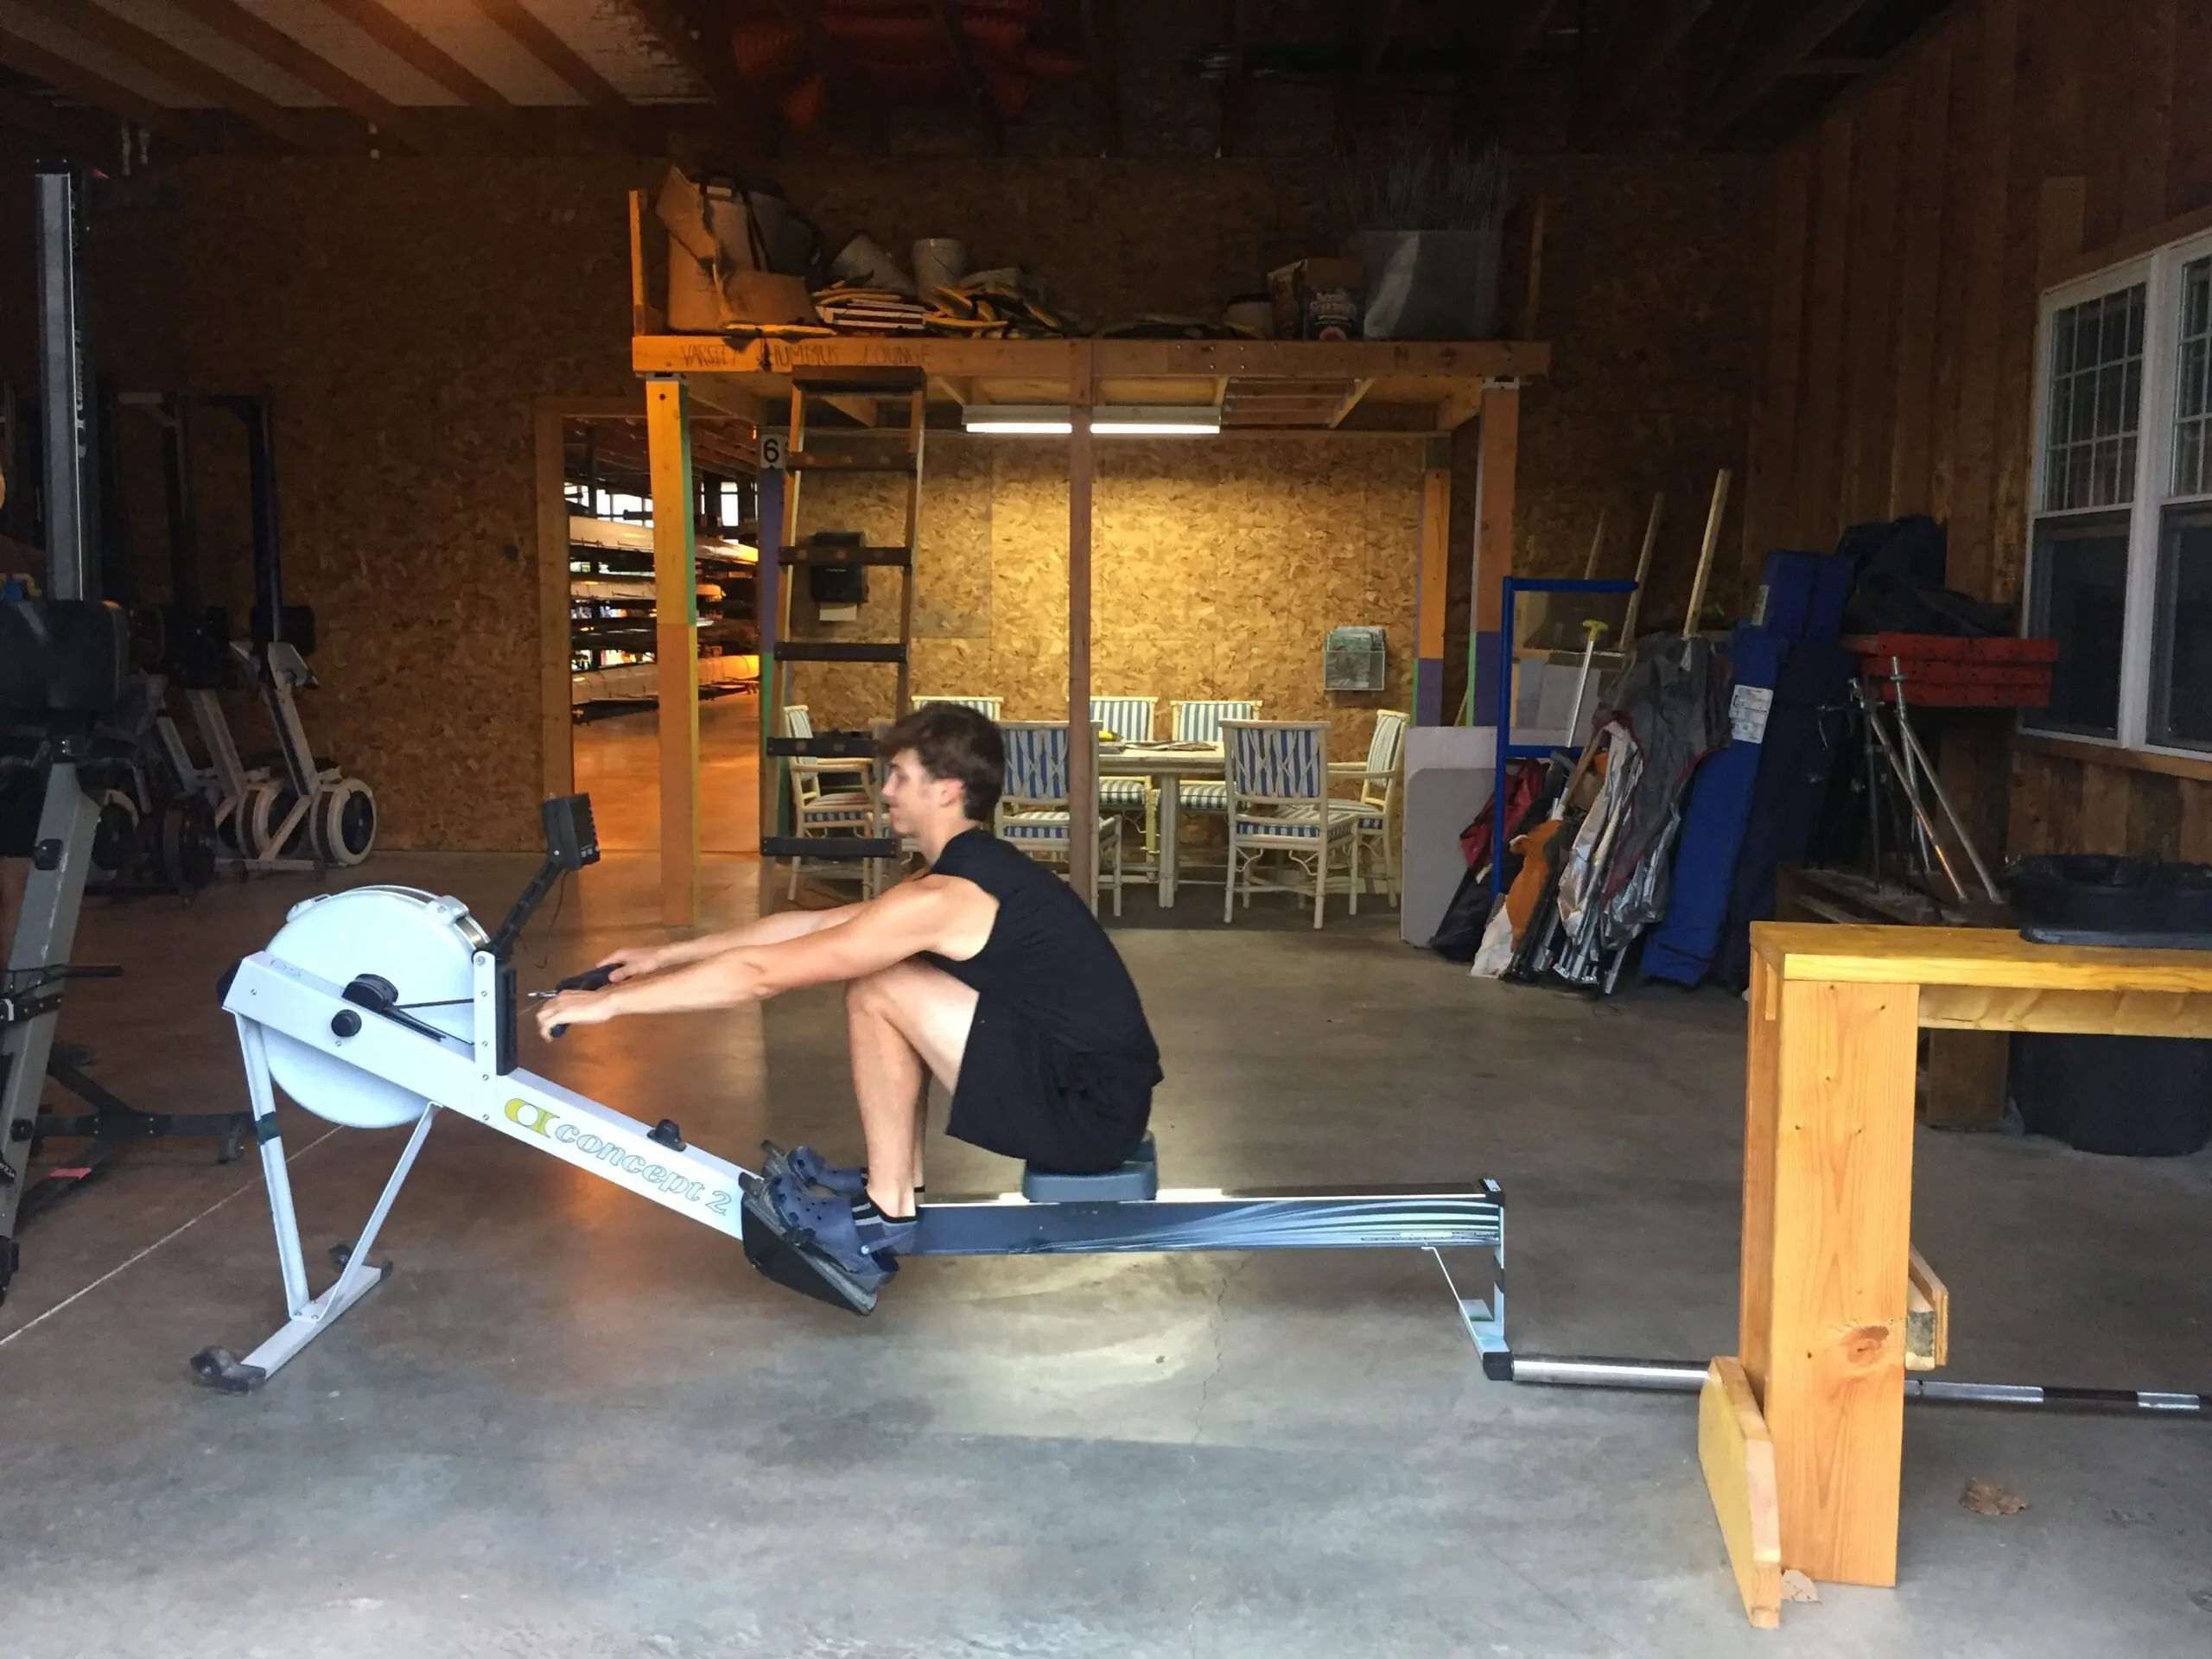 PHS’s Rowing Team’s Erg-a-Thon is Saturday!